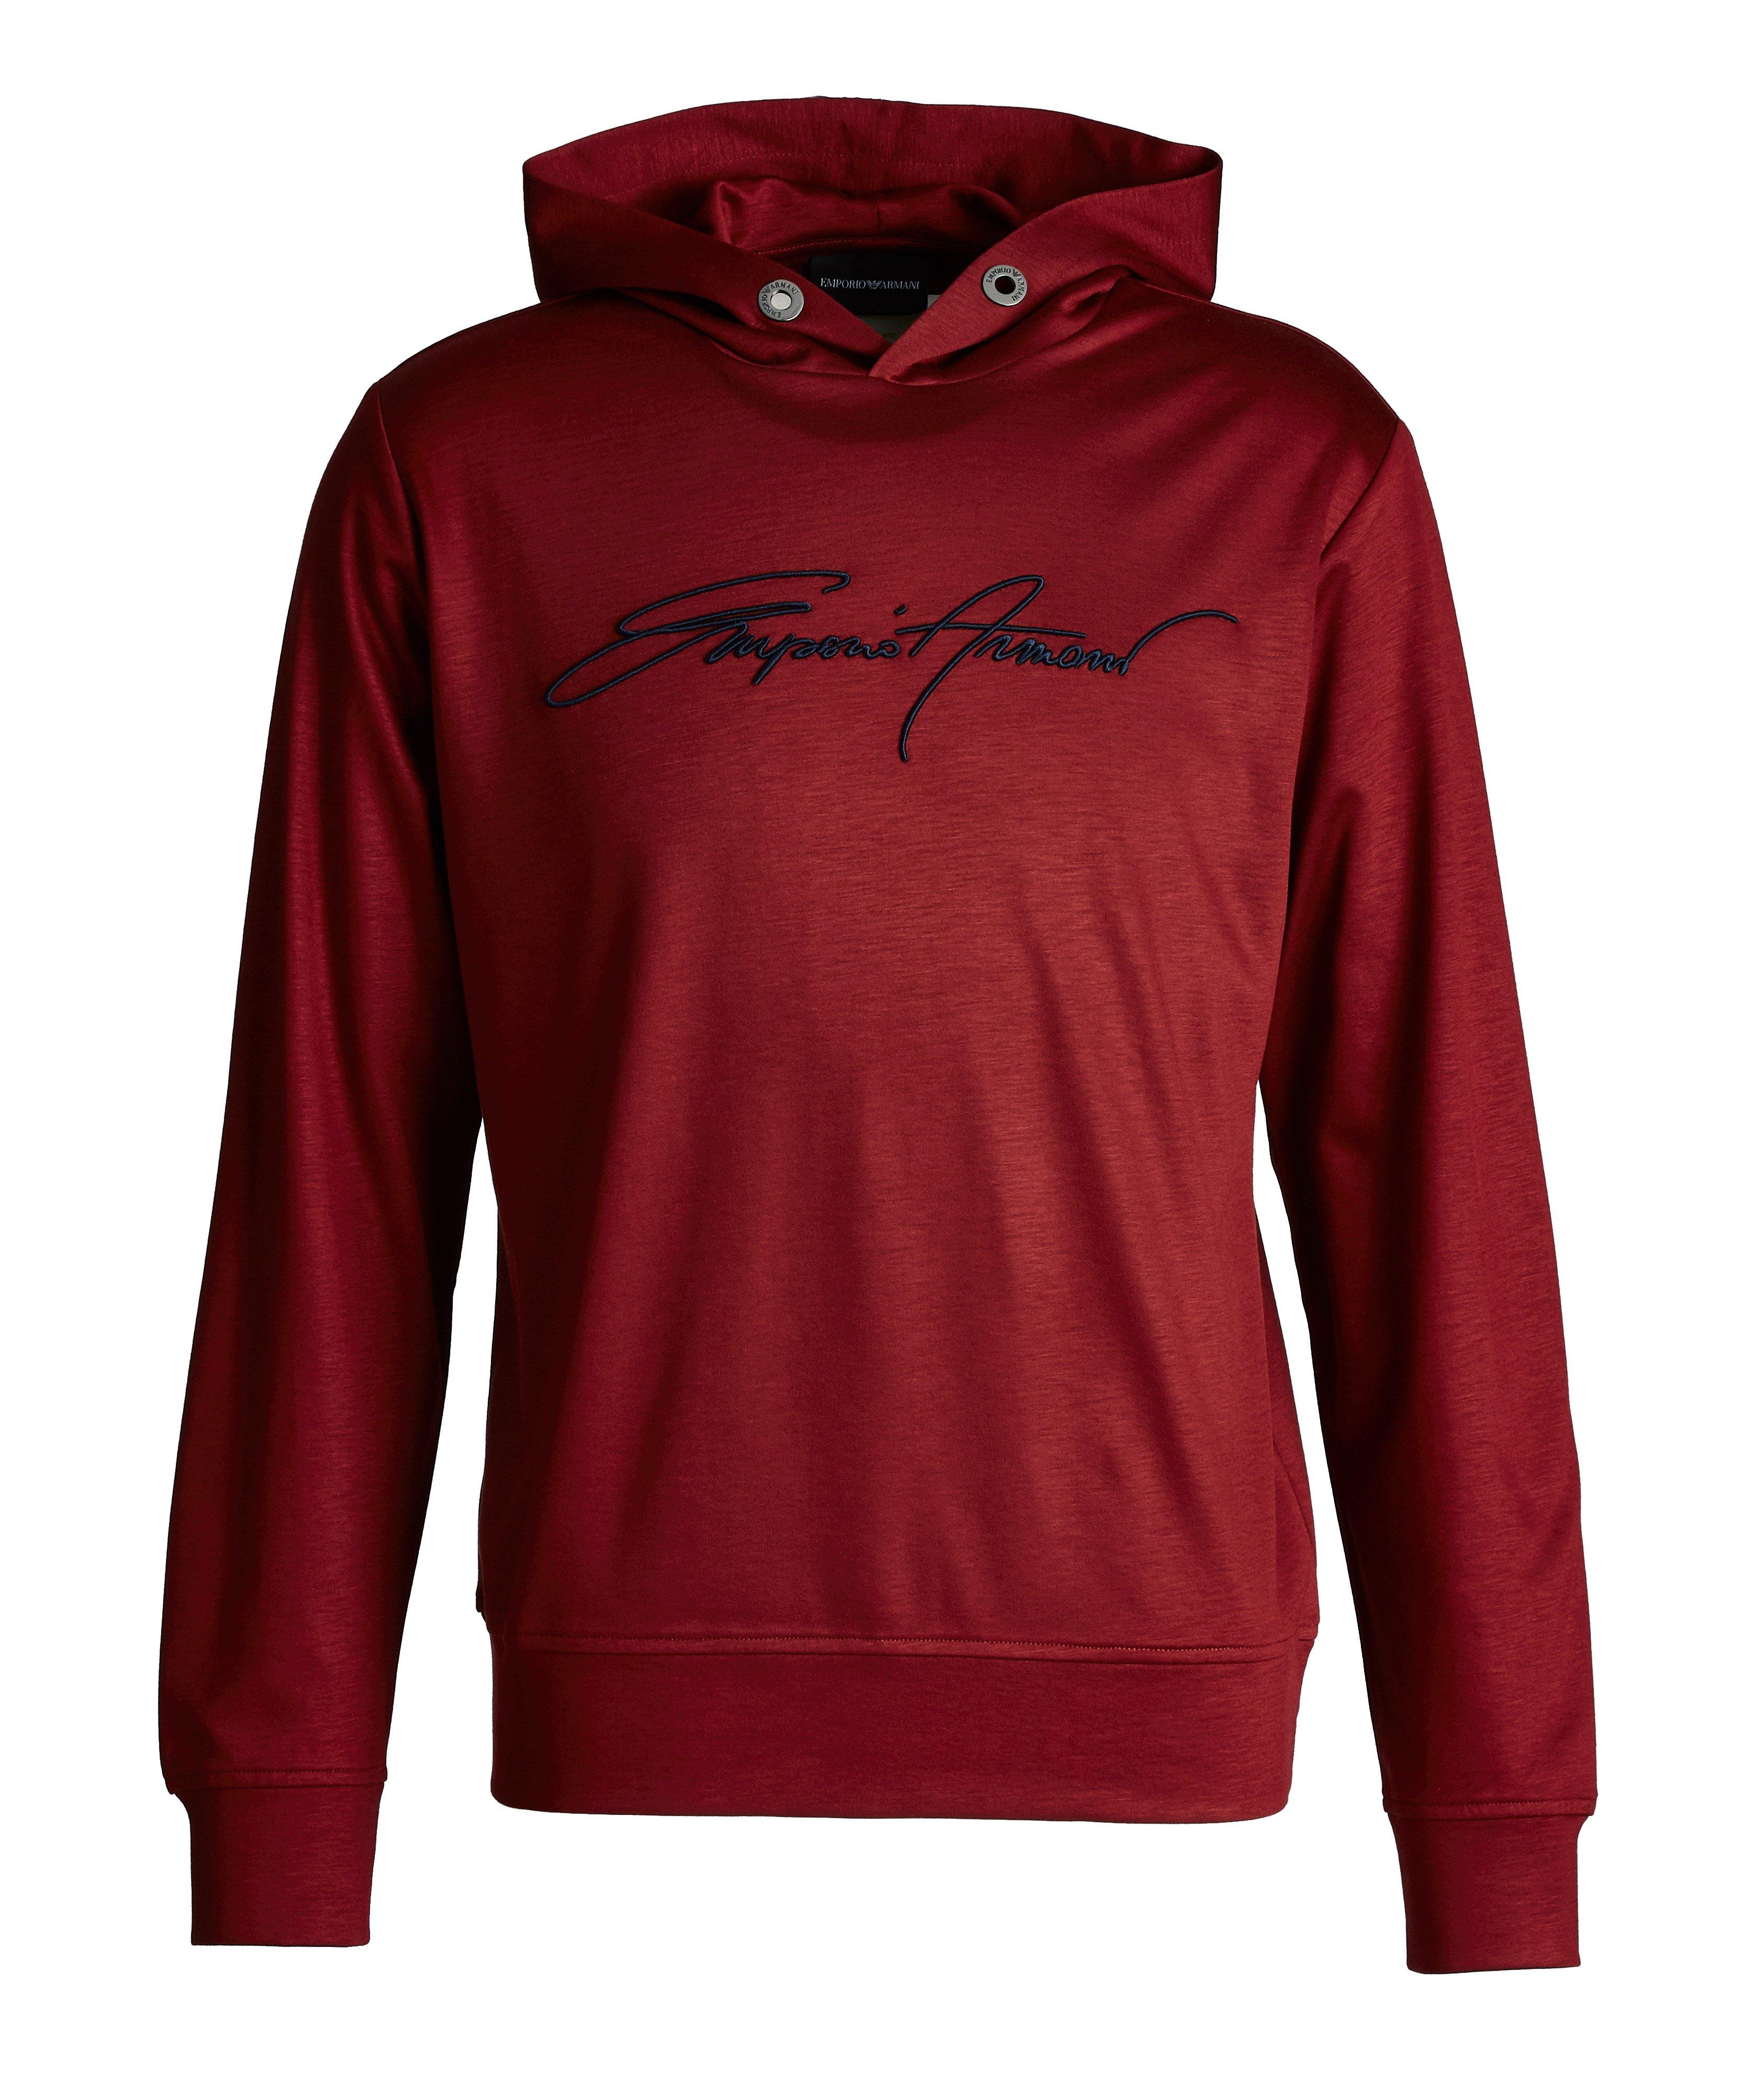 Embroidered Jersey Hoodie image 0